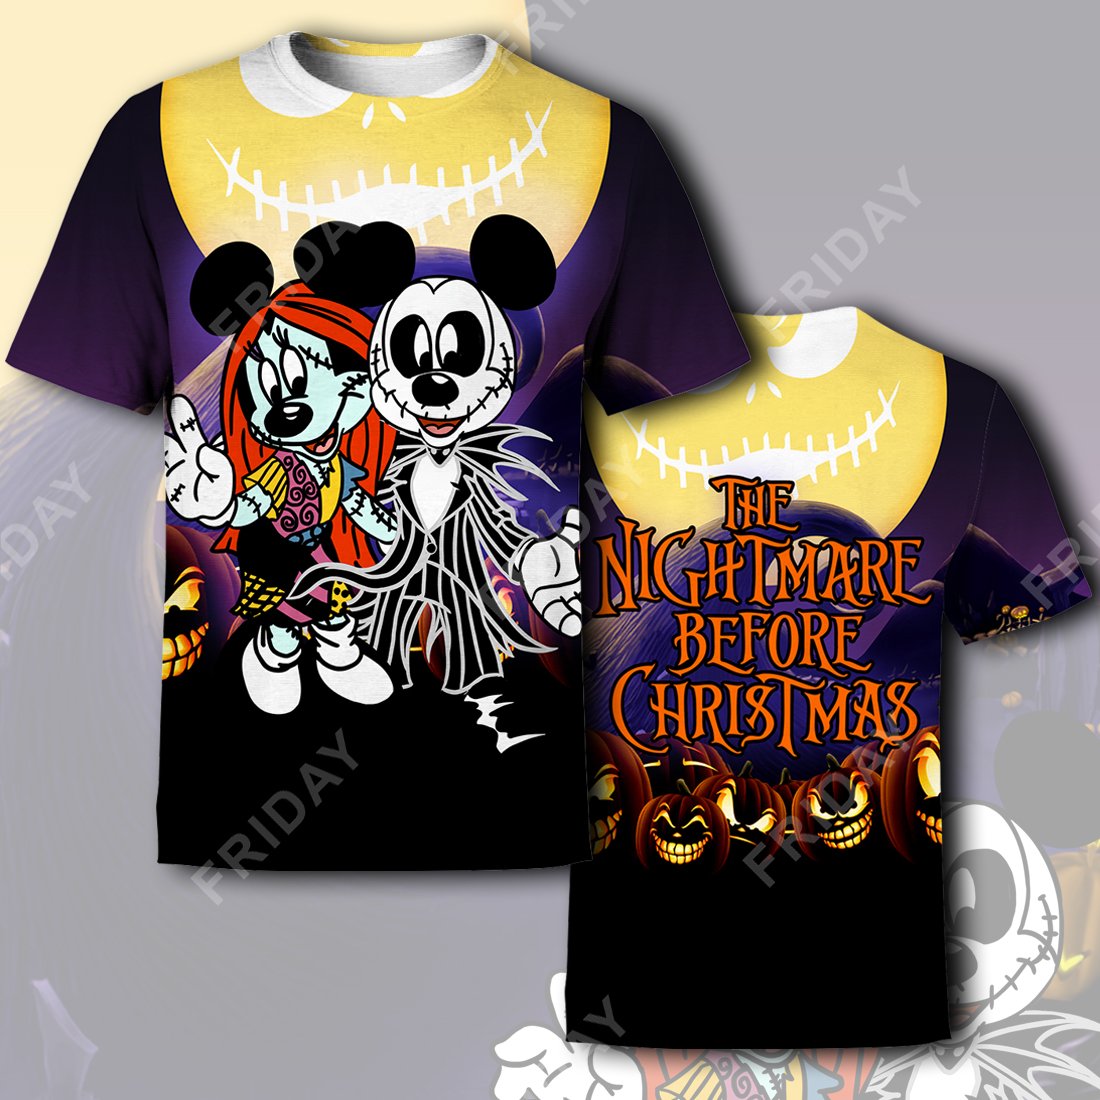 Unifinz DN T-shirt Mouse Couple Nightmare Before Christmas T-shirt Awesome DN MK Mouse Hoodie Sweater Tank 2026